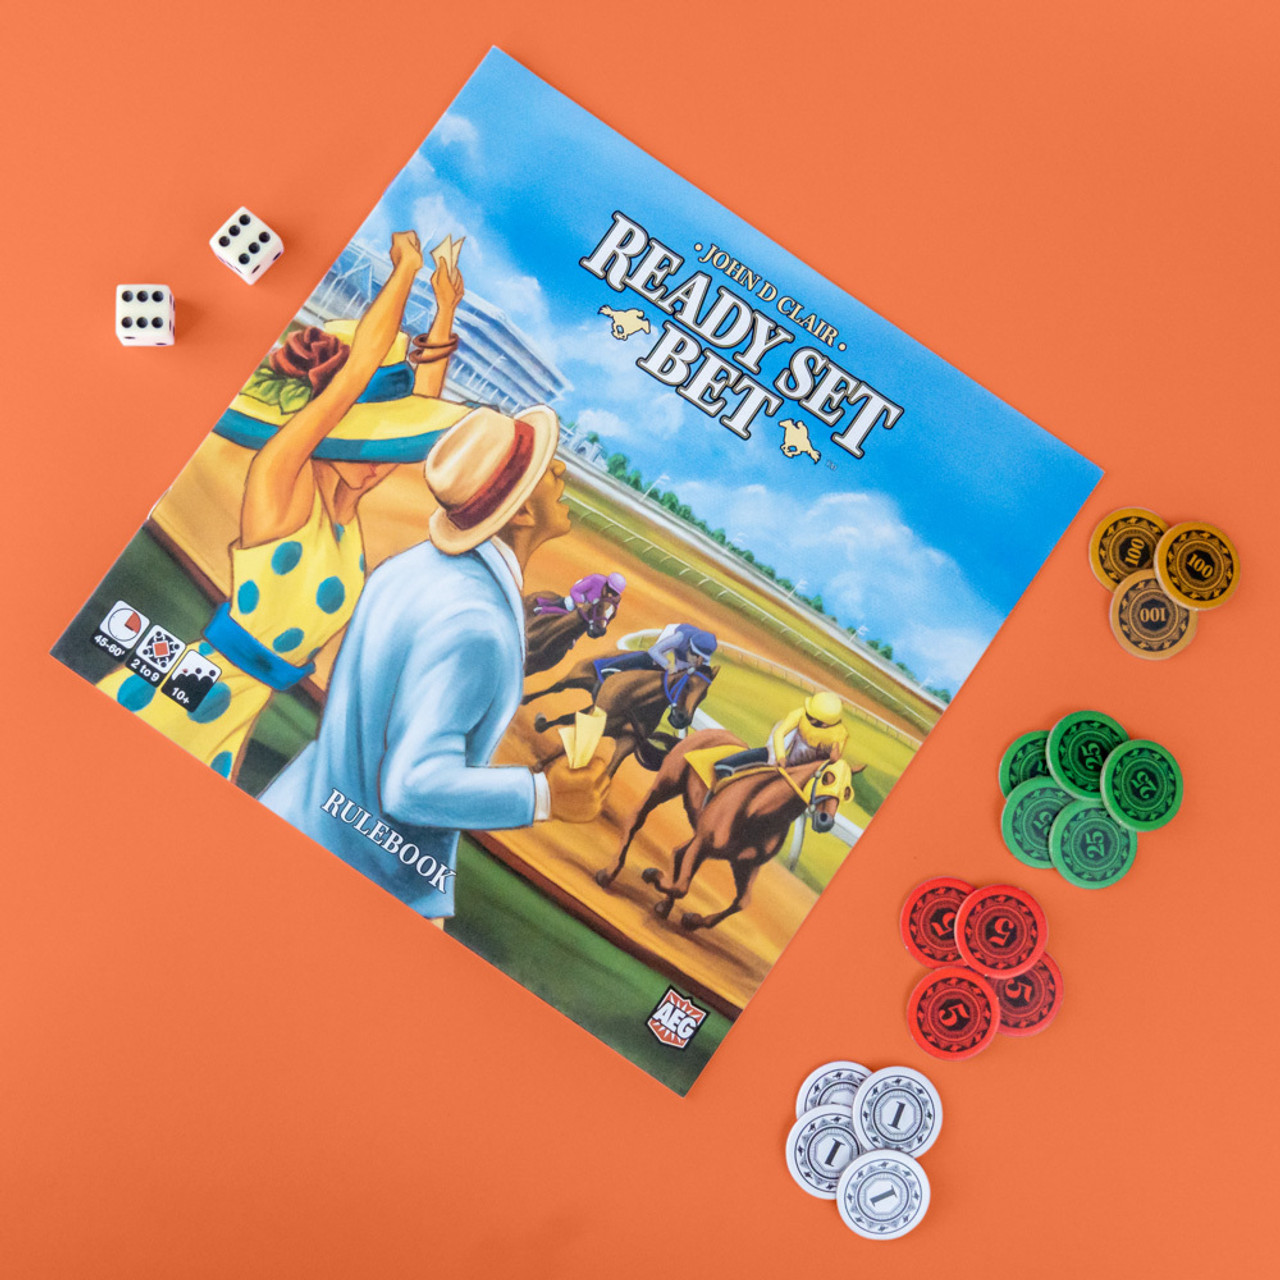 Play Ready Set Bet online through your web browser - Board Games